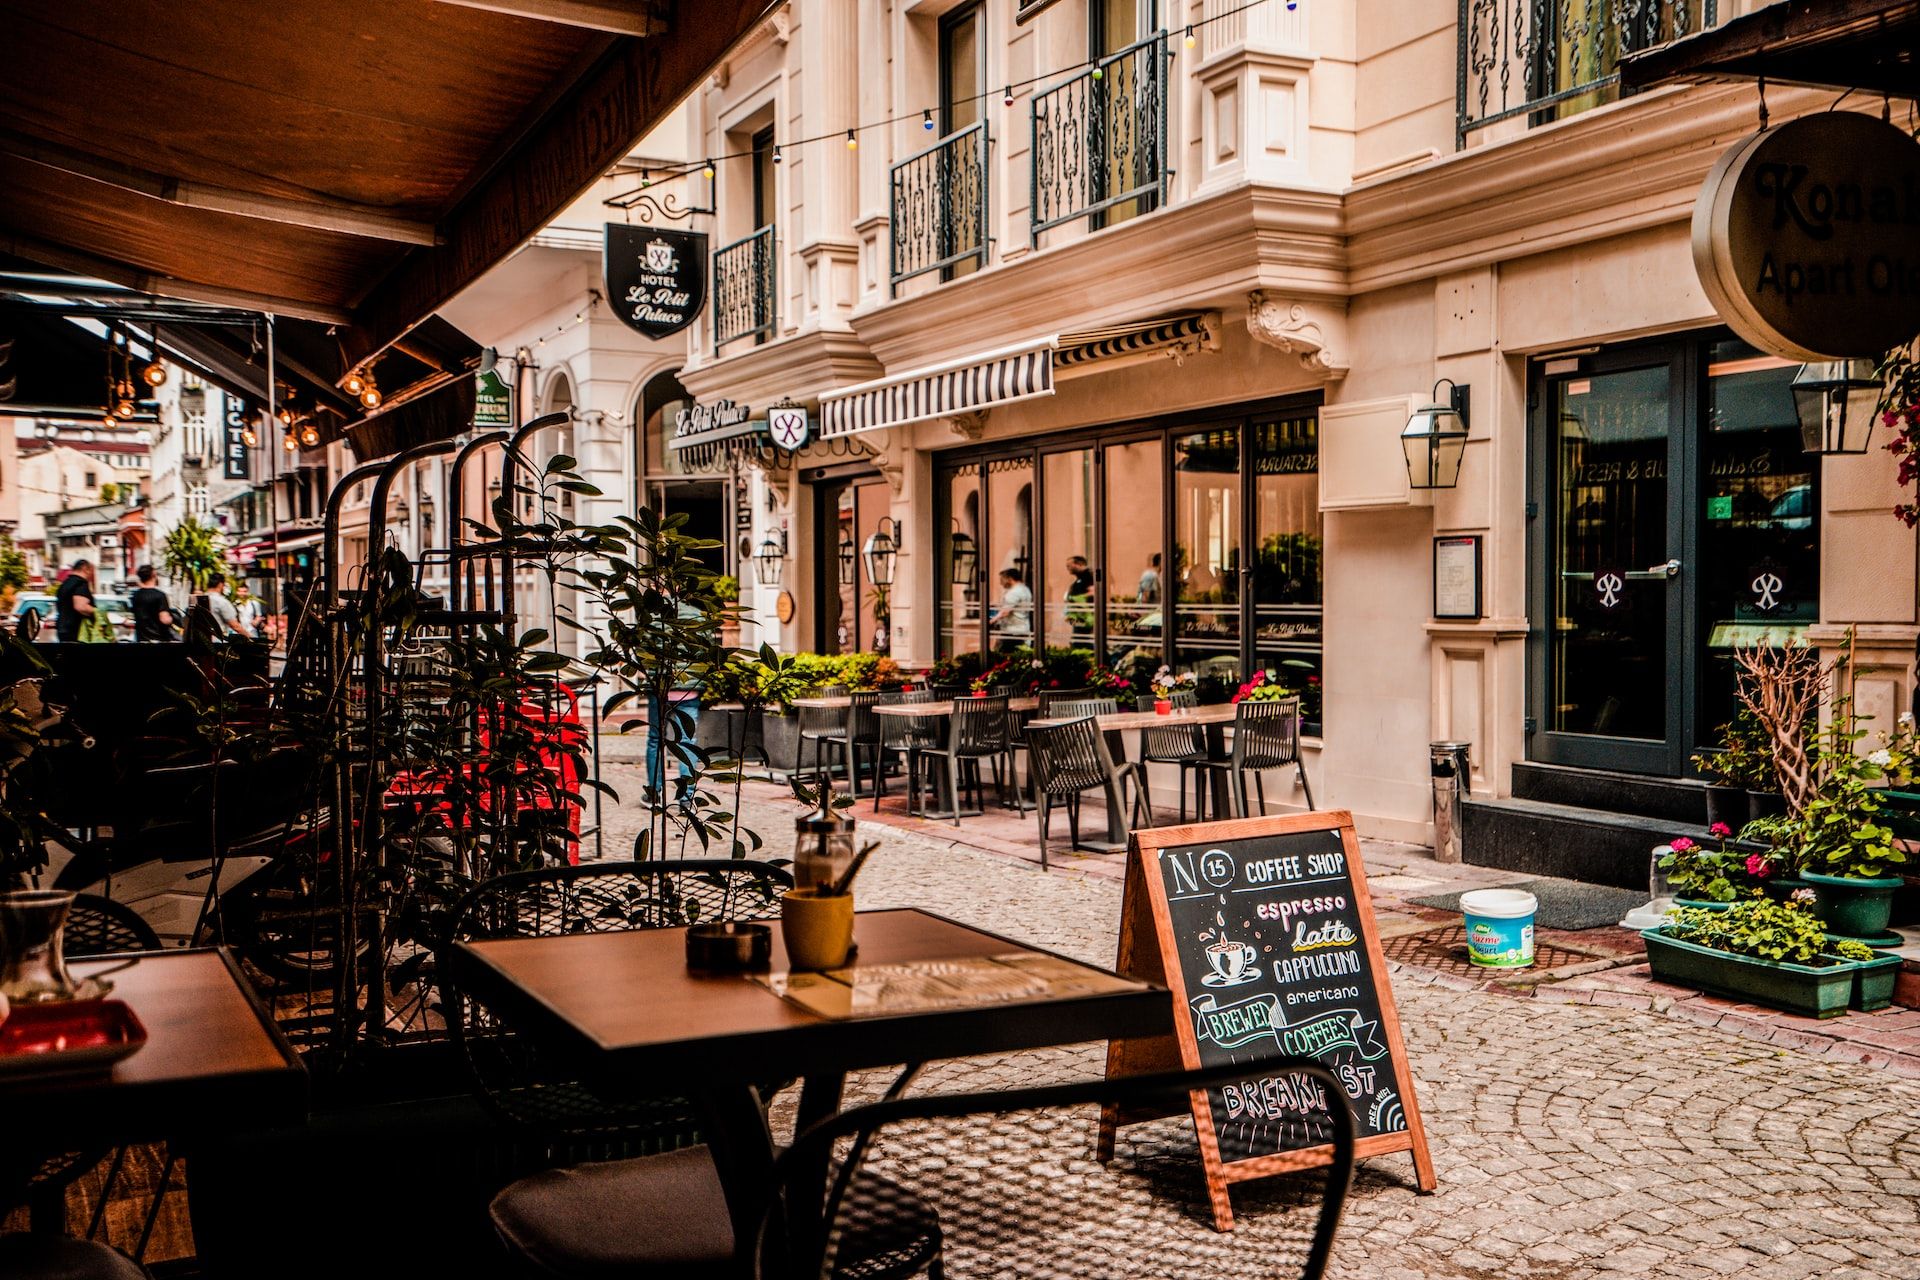 Cafe-lined cobbled street in a city centre, with awnings, outdoor tables and chairs, and a blackboard menu